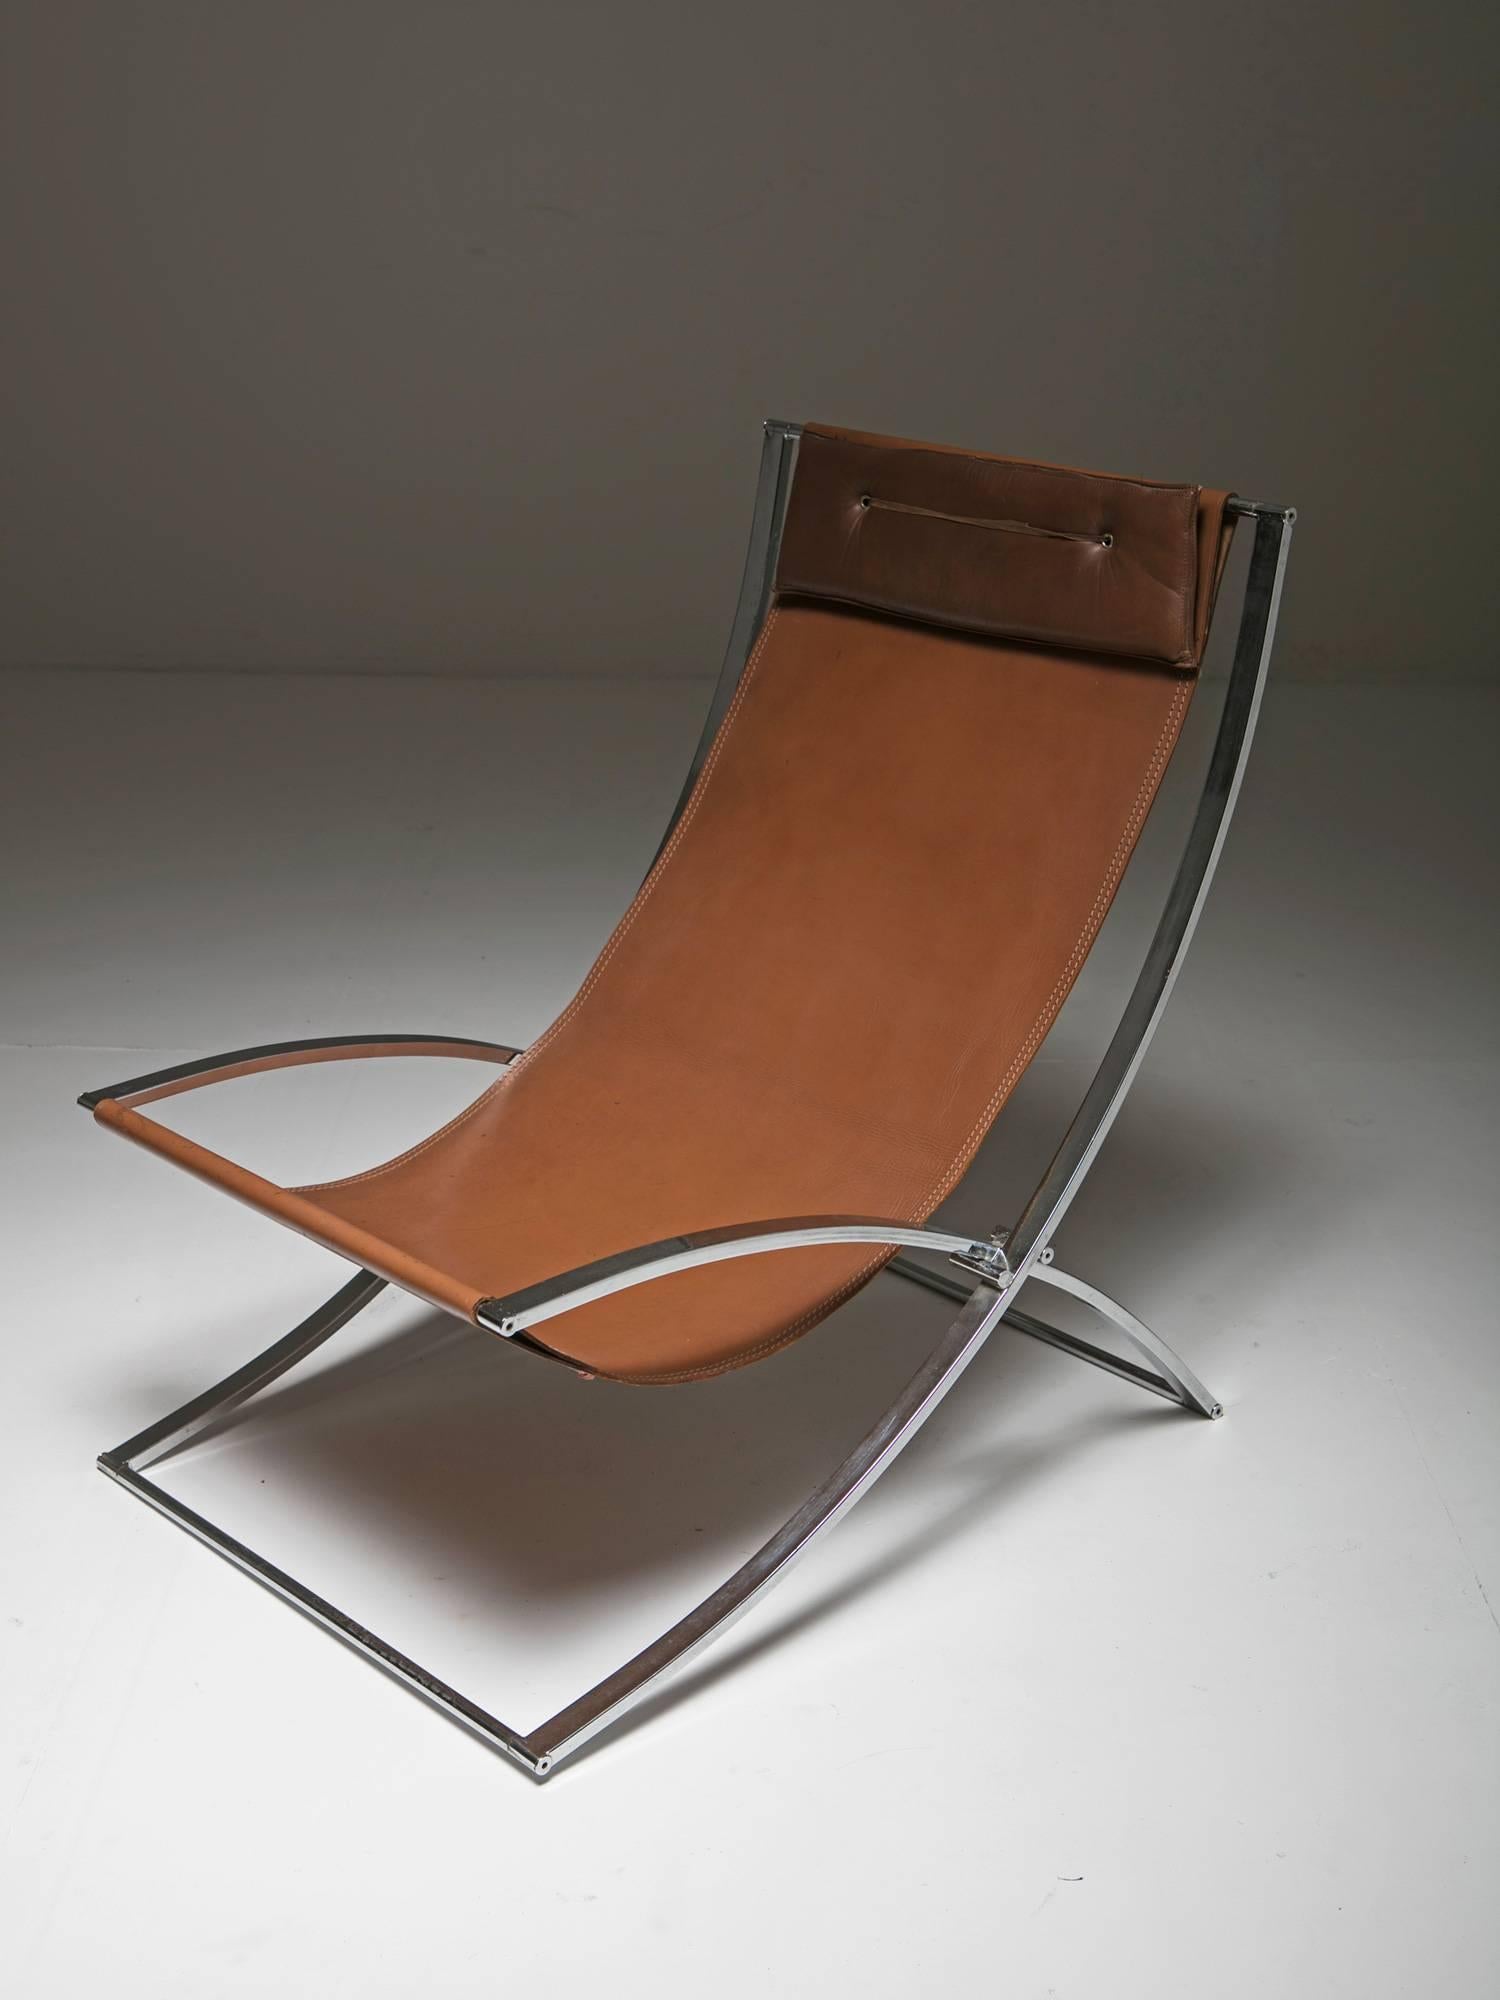 Set of two folding lounge chairs by Marcello Cuneo for Mobel.
Sleek chrome frame and leather upholstery with compact head rest pillow.